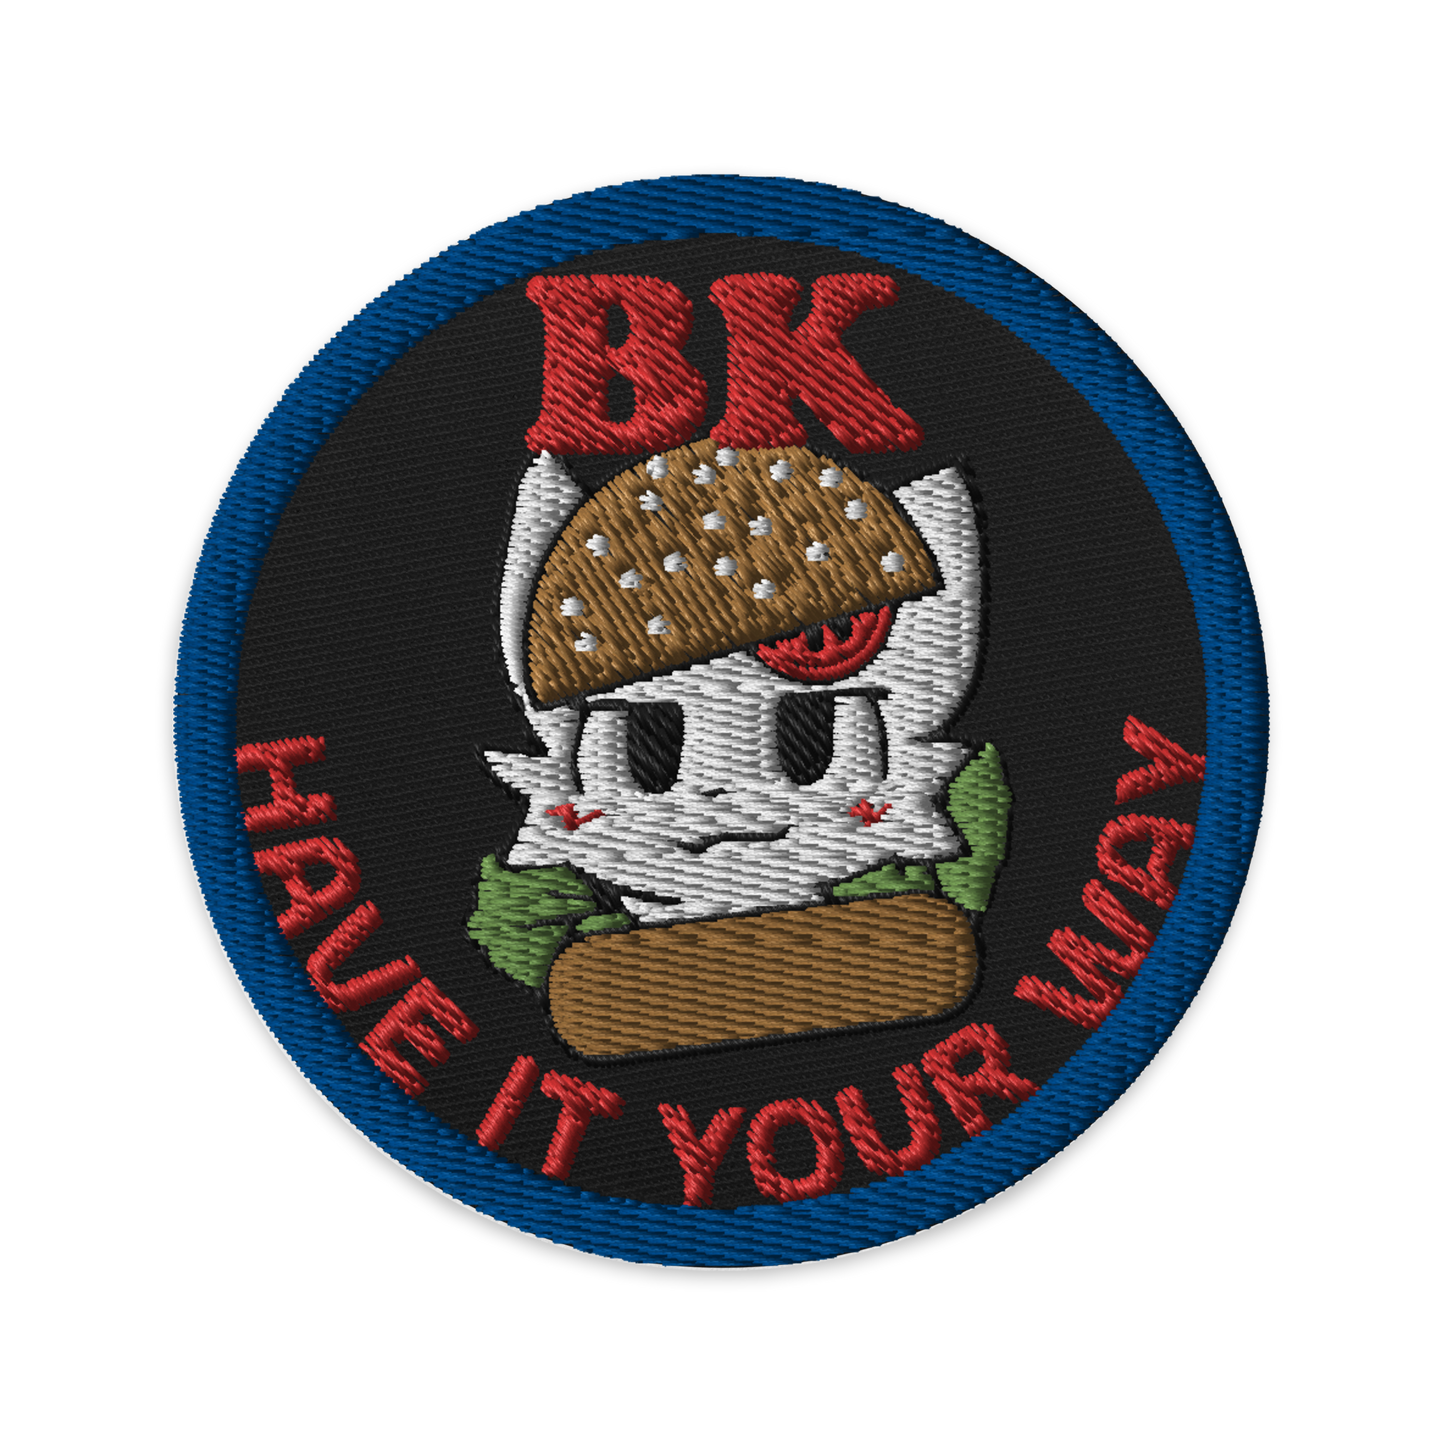 Meme Patches: Have It Your Way, At BK